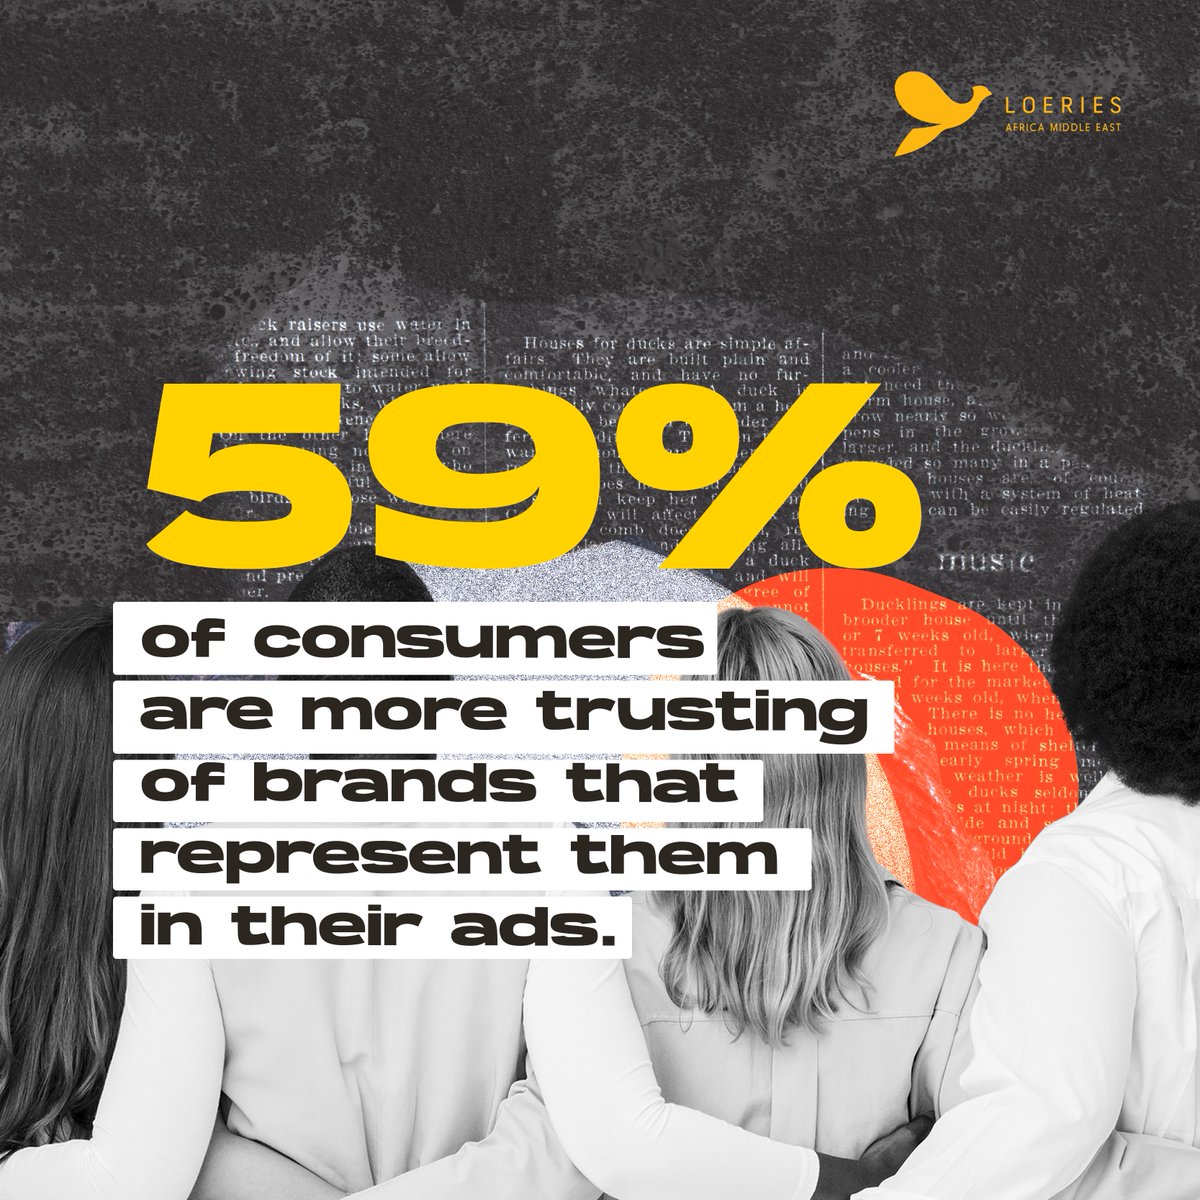 To bond on a deeper level with consumers, brands need to see them, understand them and go as far as representing them in ads. Only then will brands earn consumer trust What brands do you think do this well? #rewritethescript #factcheck #lyc2023